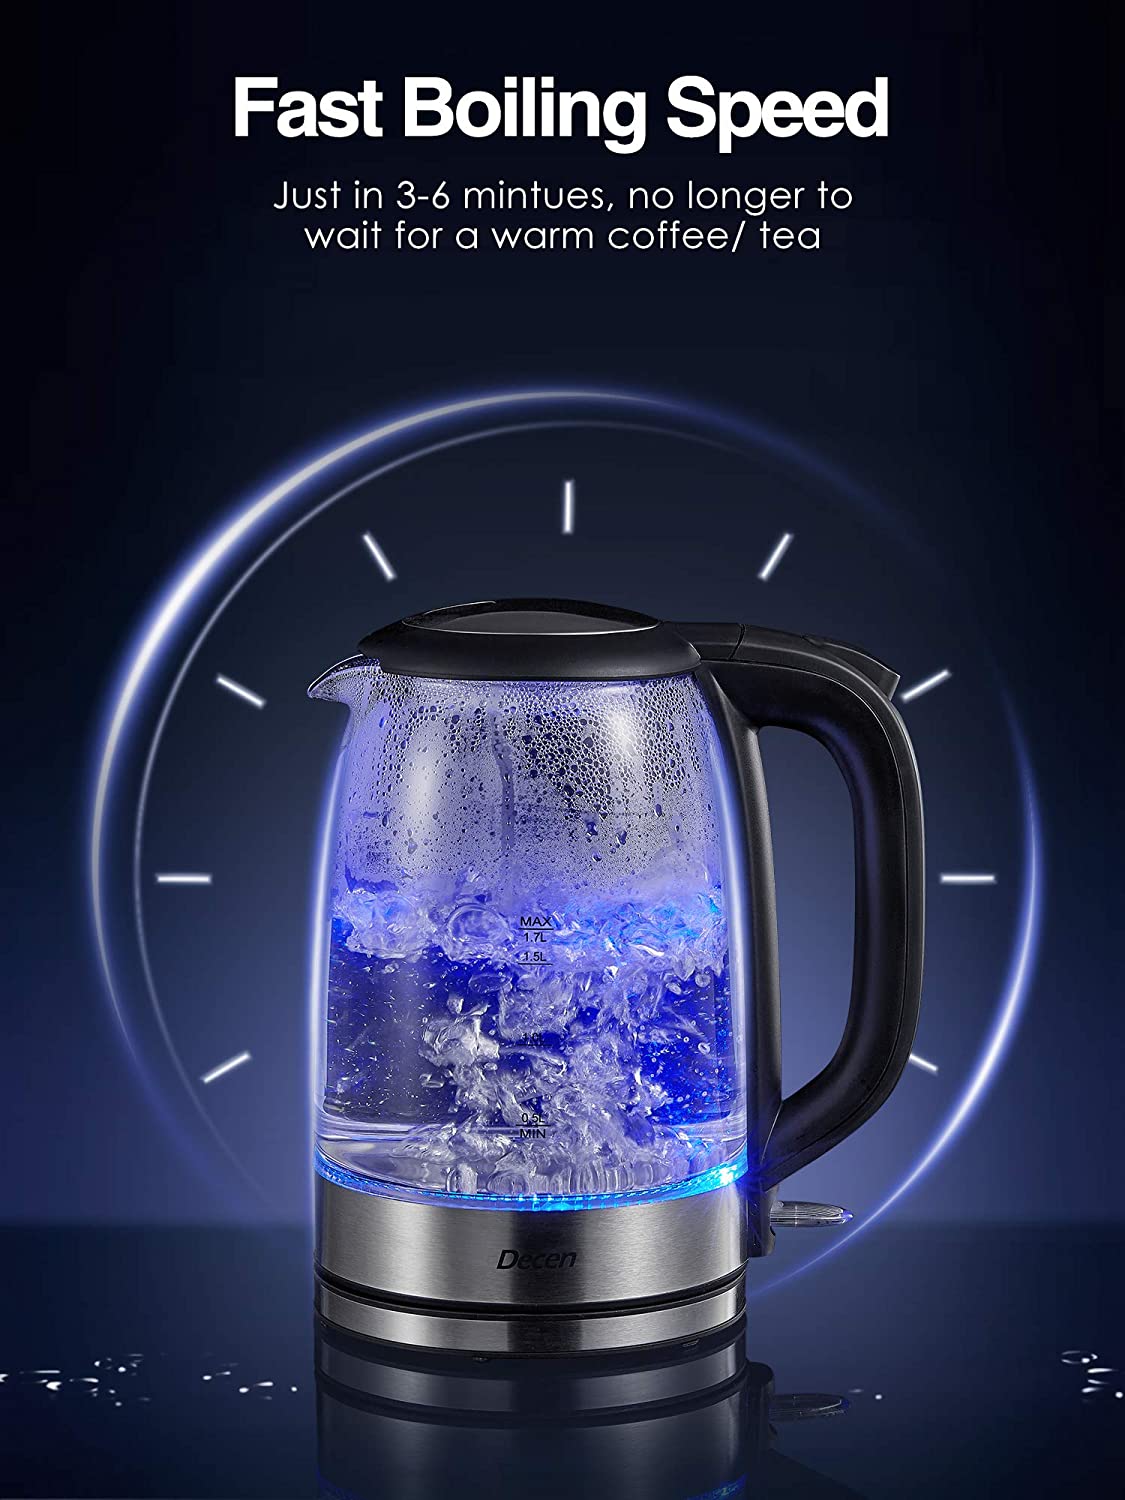 Decen | Electric Kettle, 1500W Glass Electric Tea Kettle with Speedboil Tech, 1.7L (8 Cups) Water Kettle with LED Light, Auto Shut-Off And Boil-Dry Protection, Stainless Steel Lid & Bottom, Fast Boiling Speed